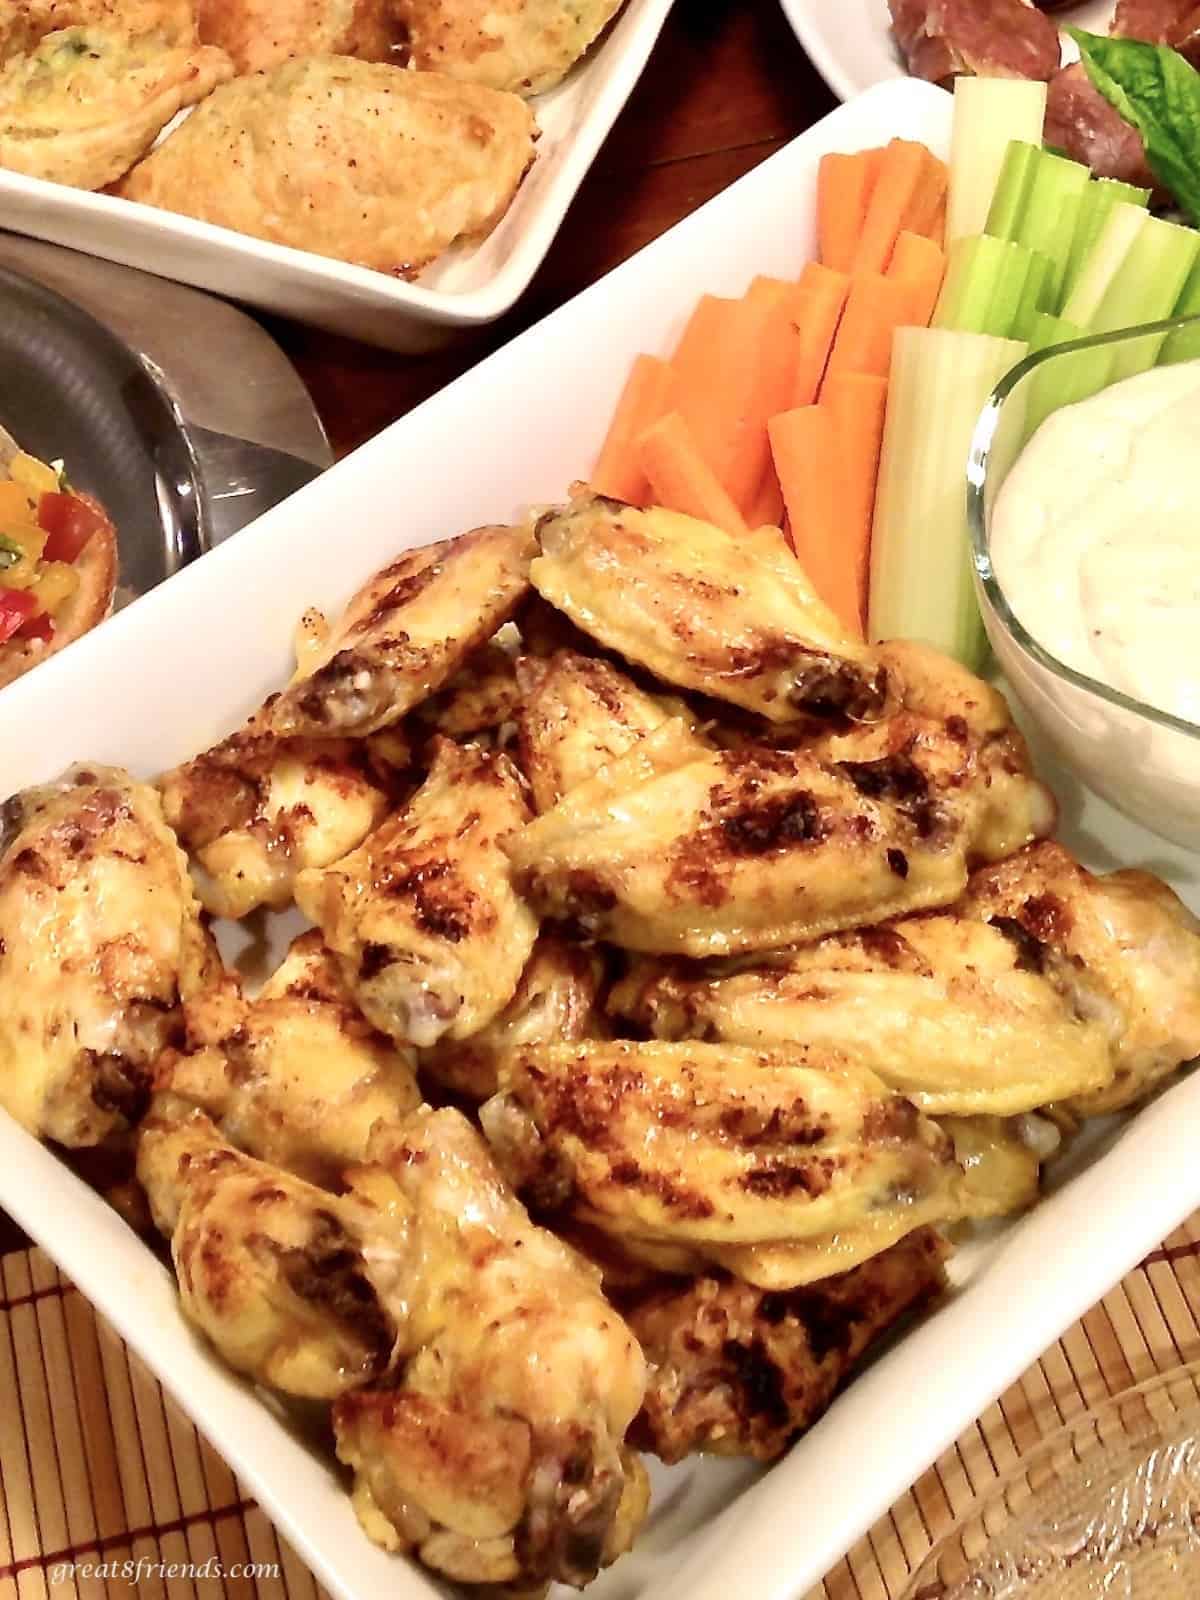 Buffalo chicken wings served as an appetizer with blue cheese dressing.